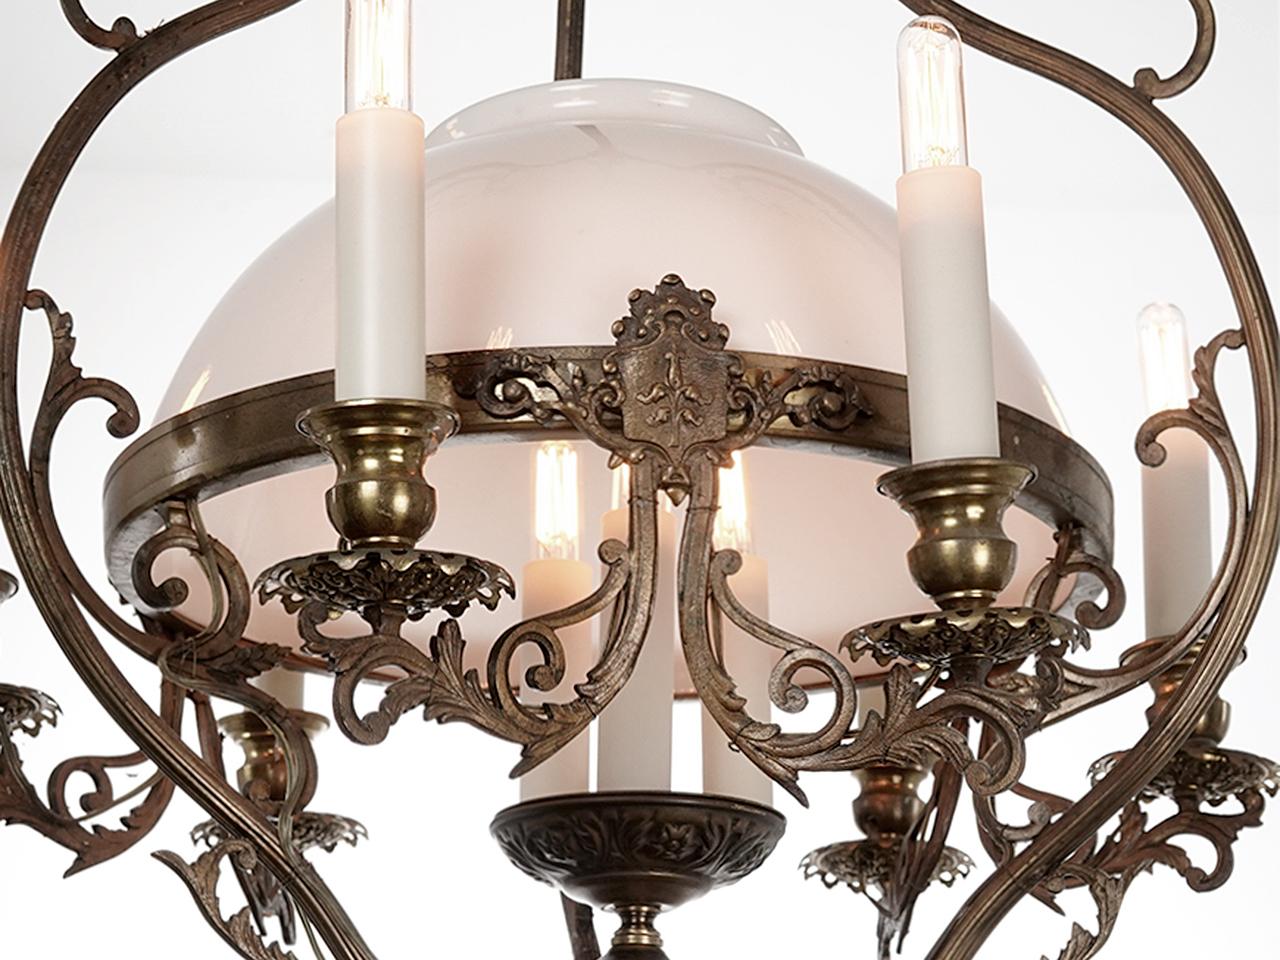 This early glass candle chandelier has a nice rich look. Its complete with its milk glass dome and glass tube candles. The finish is untouched and came out of a small 1920s New York lobby. it takes 9 25W candelabra bulbs or LEDS. Its 30 inches plus